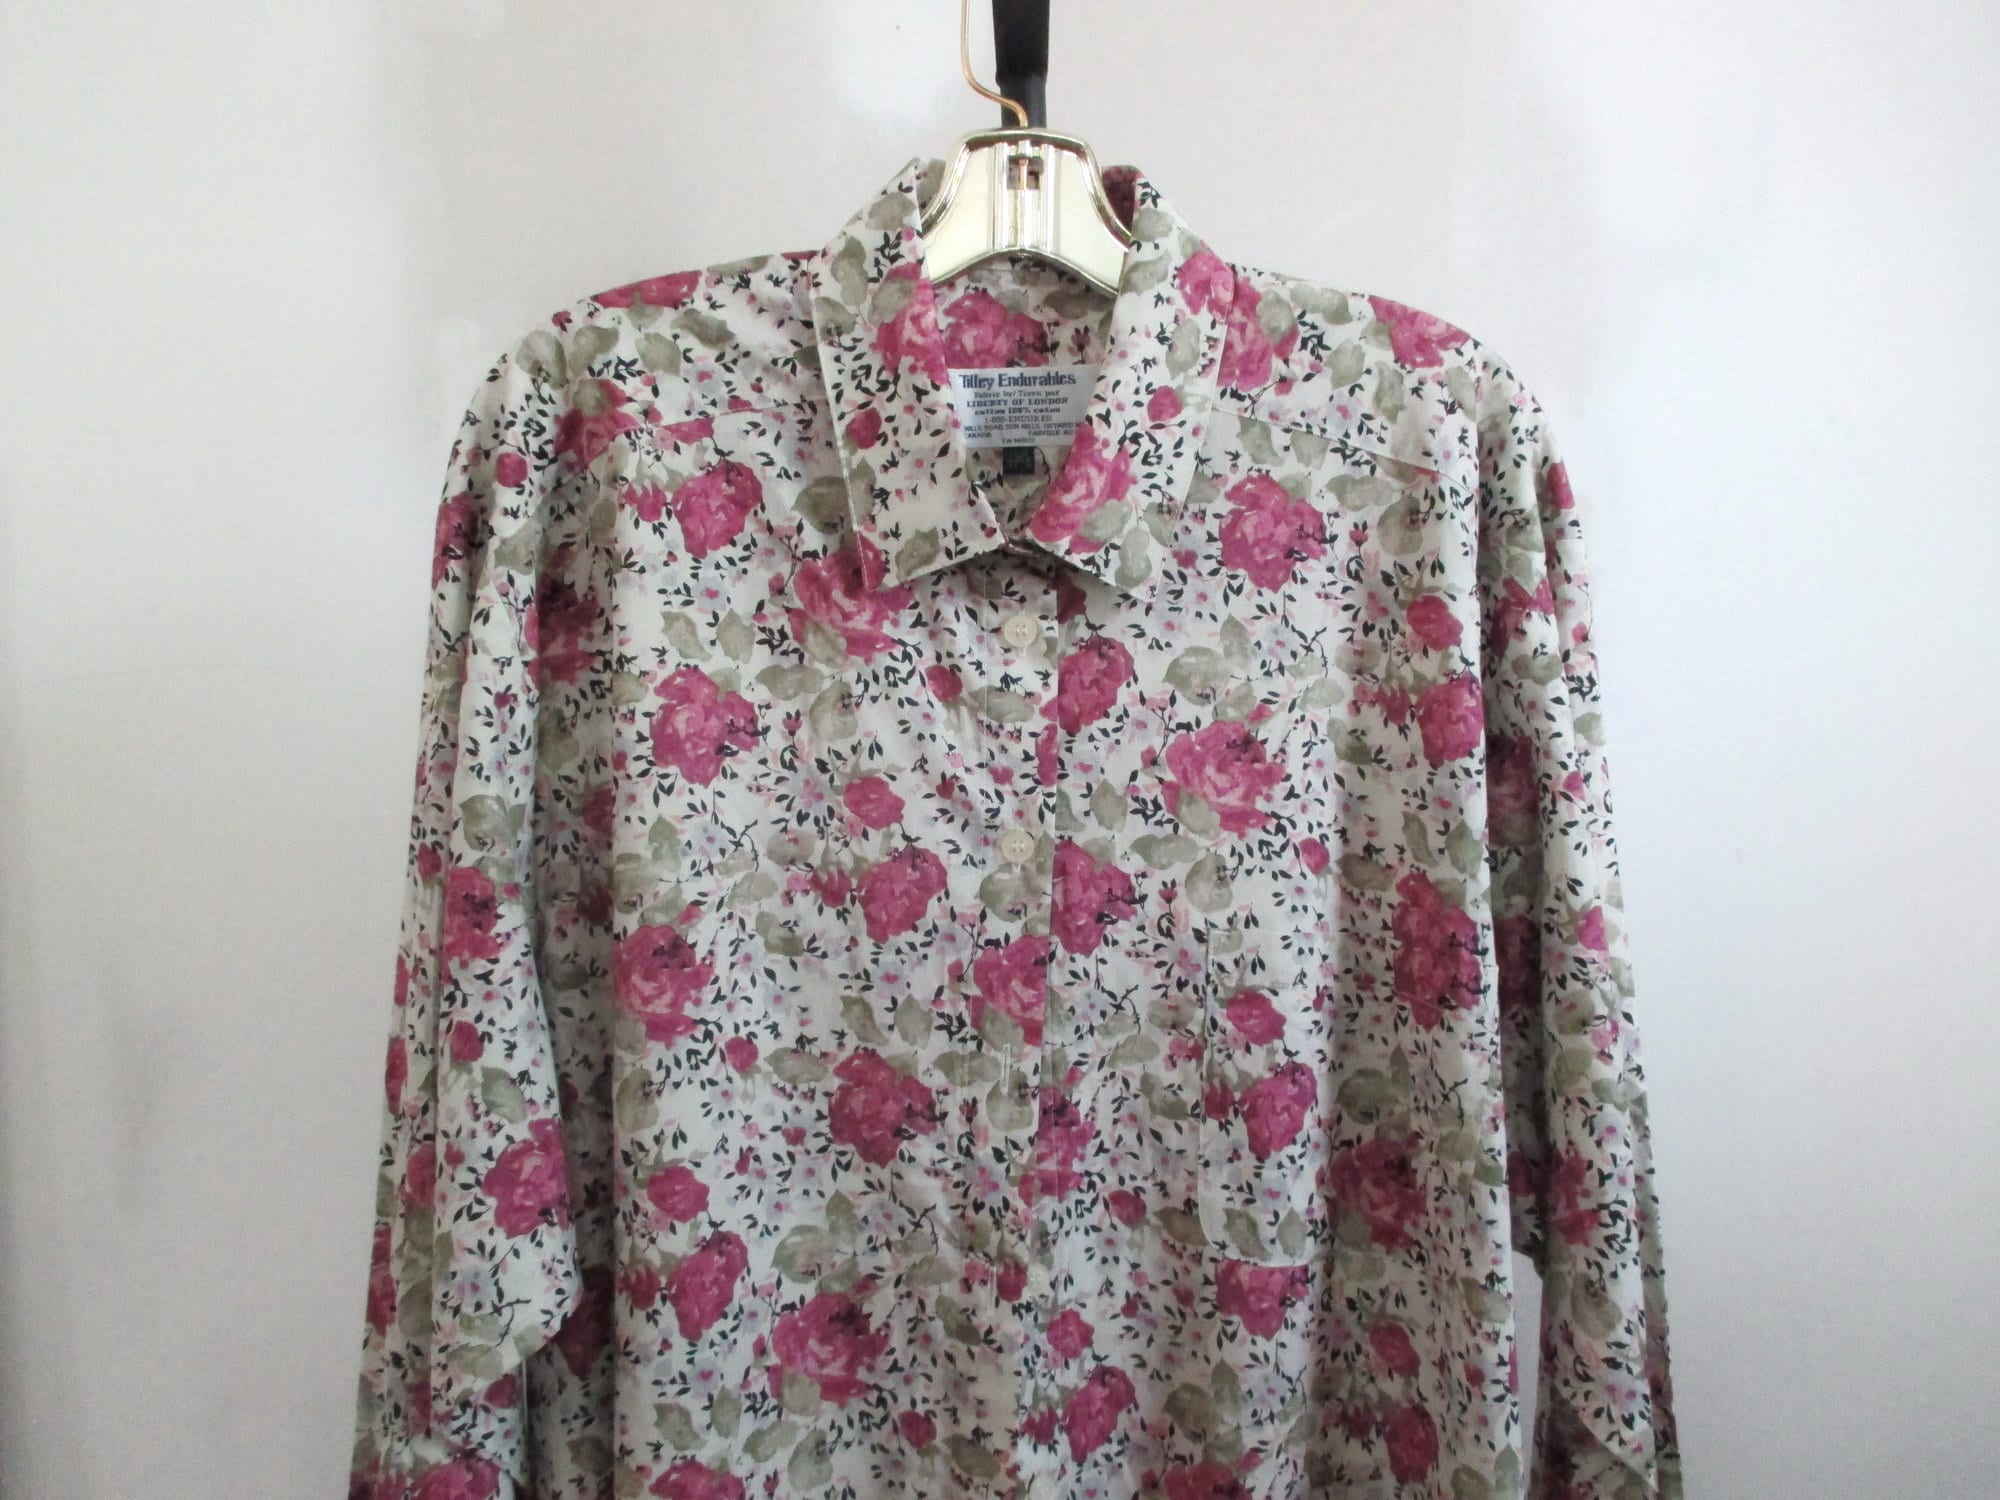 Liberty 100% Cotton Shirt Size XXXL Tilley Endurables New With Tags Made in  Canada Modest Clothing 